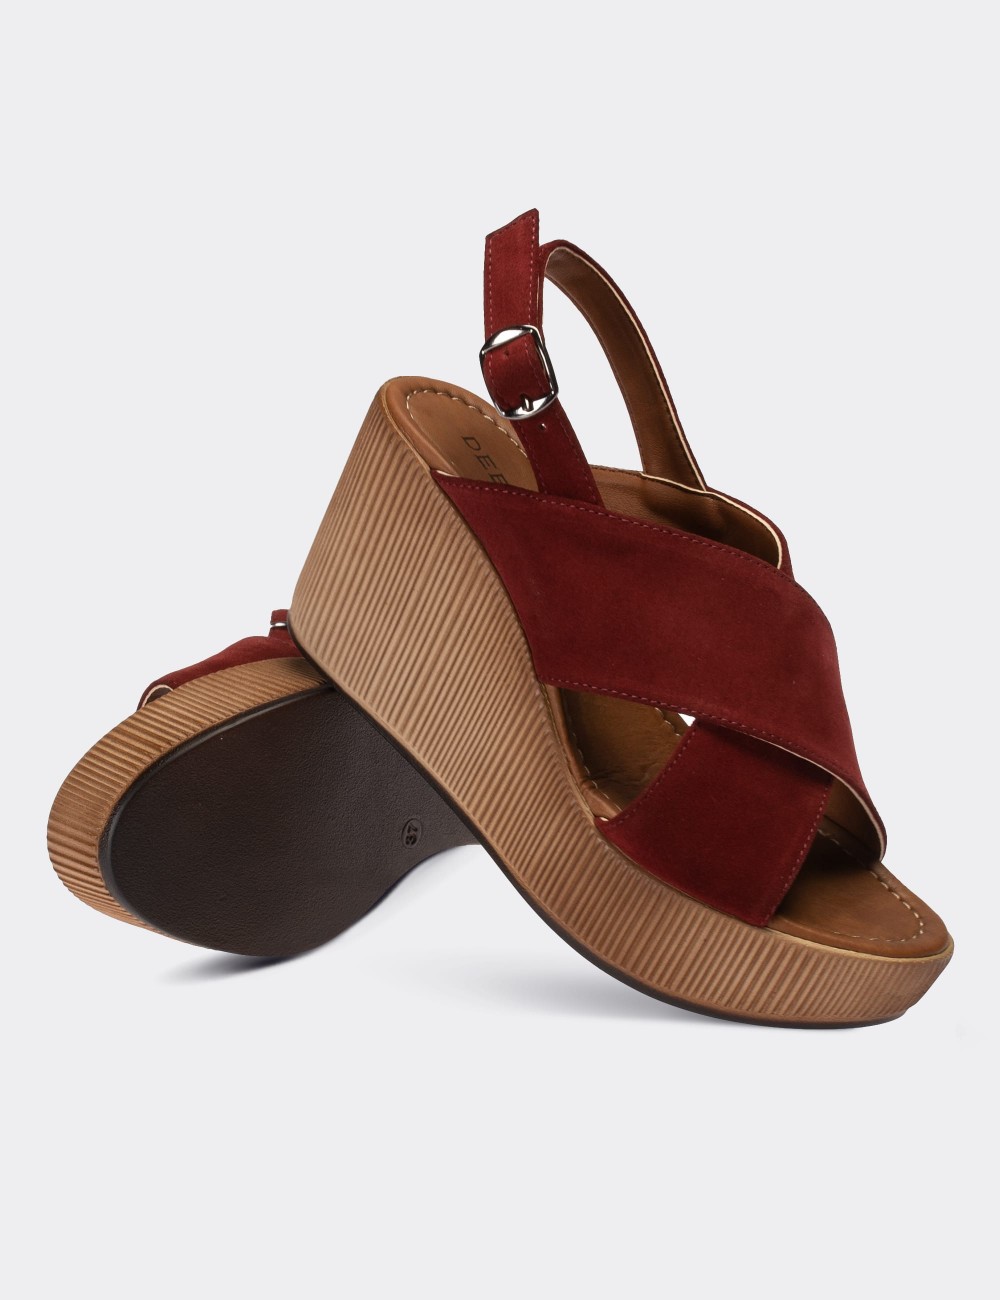 Burgundy Suede Leather Sandals - E6174ZBRDC02